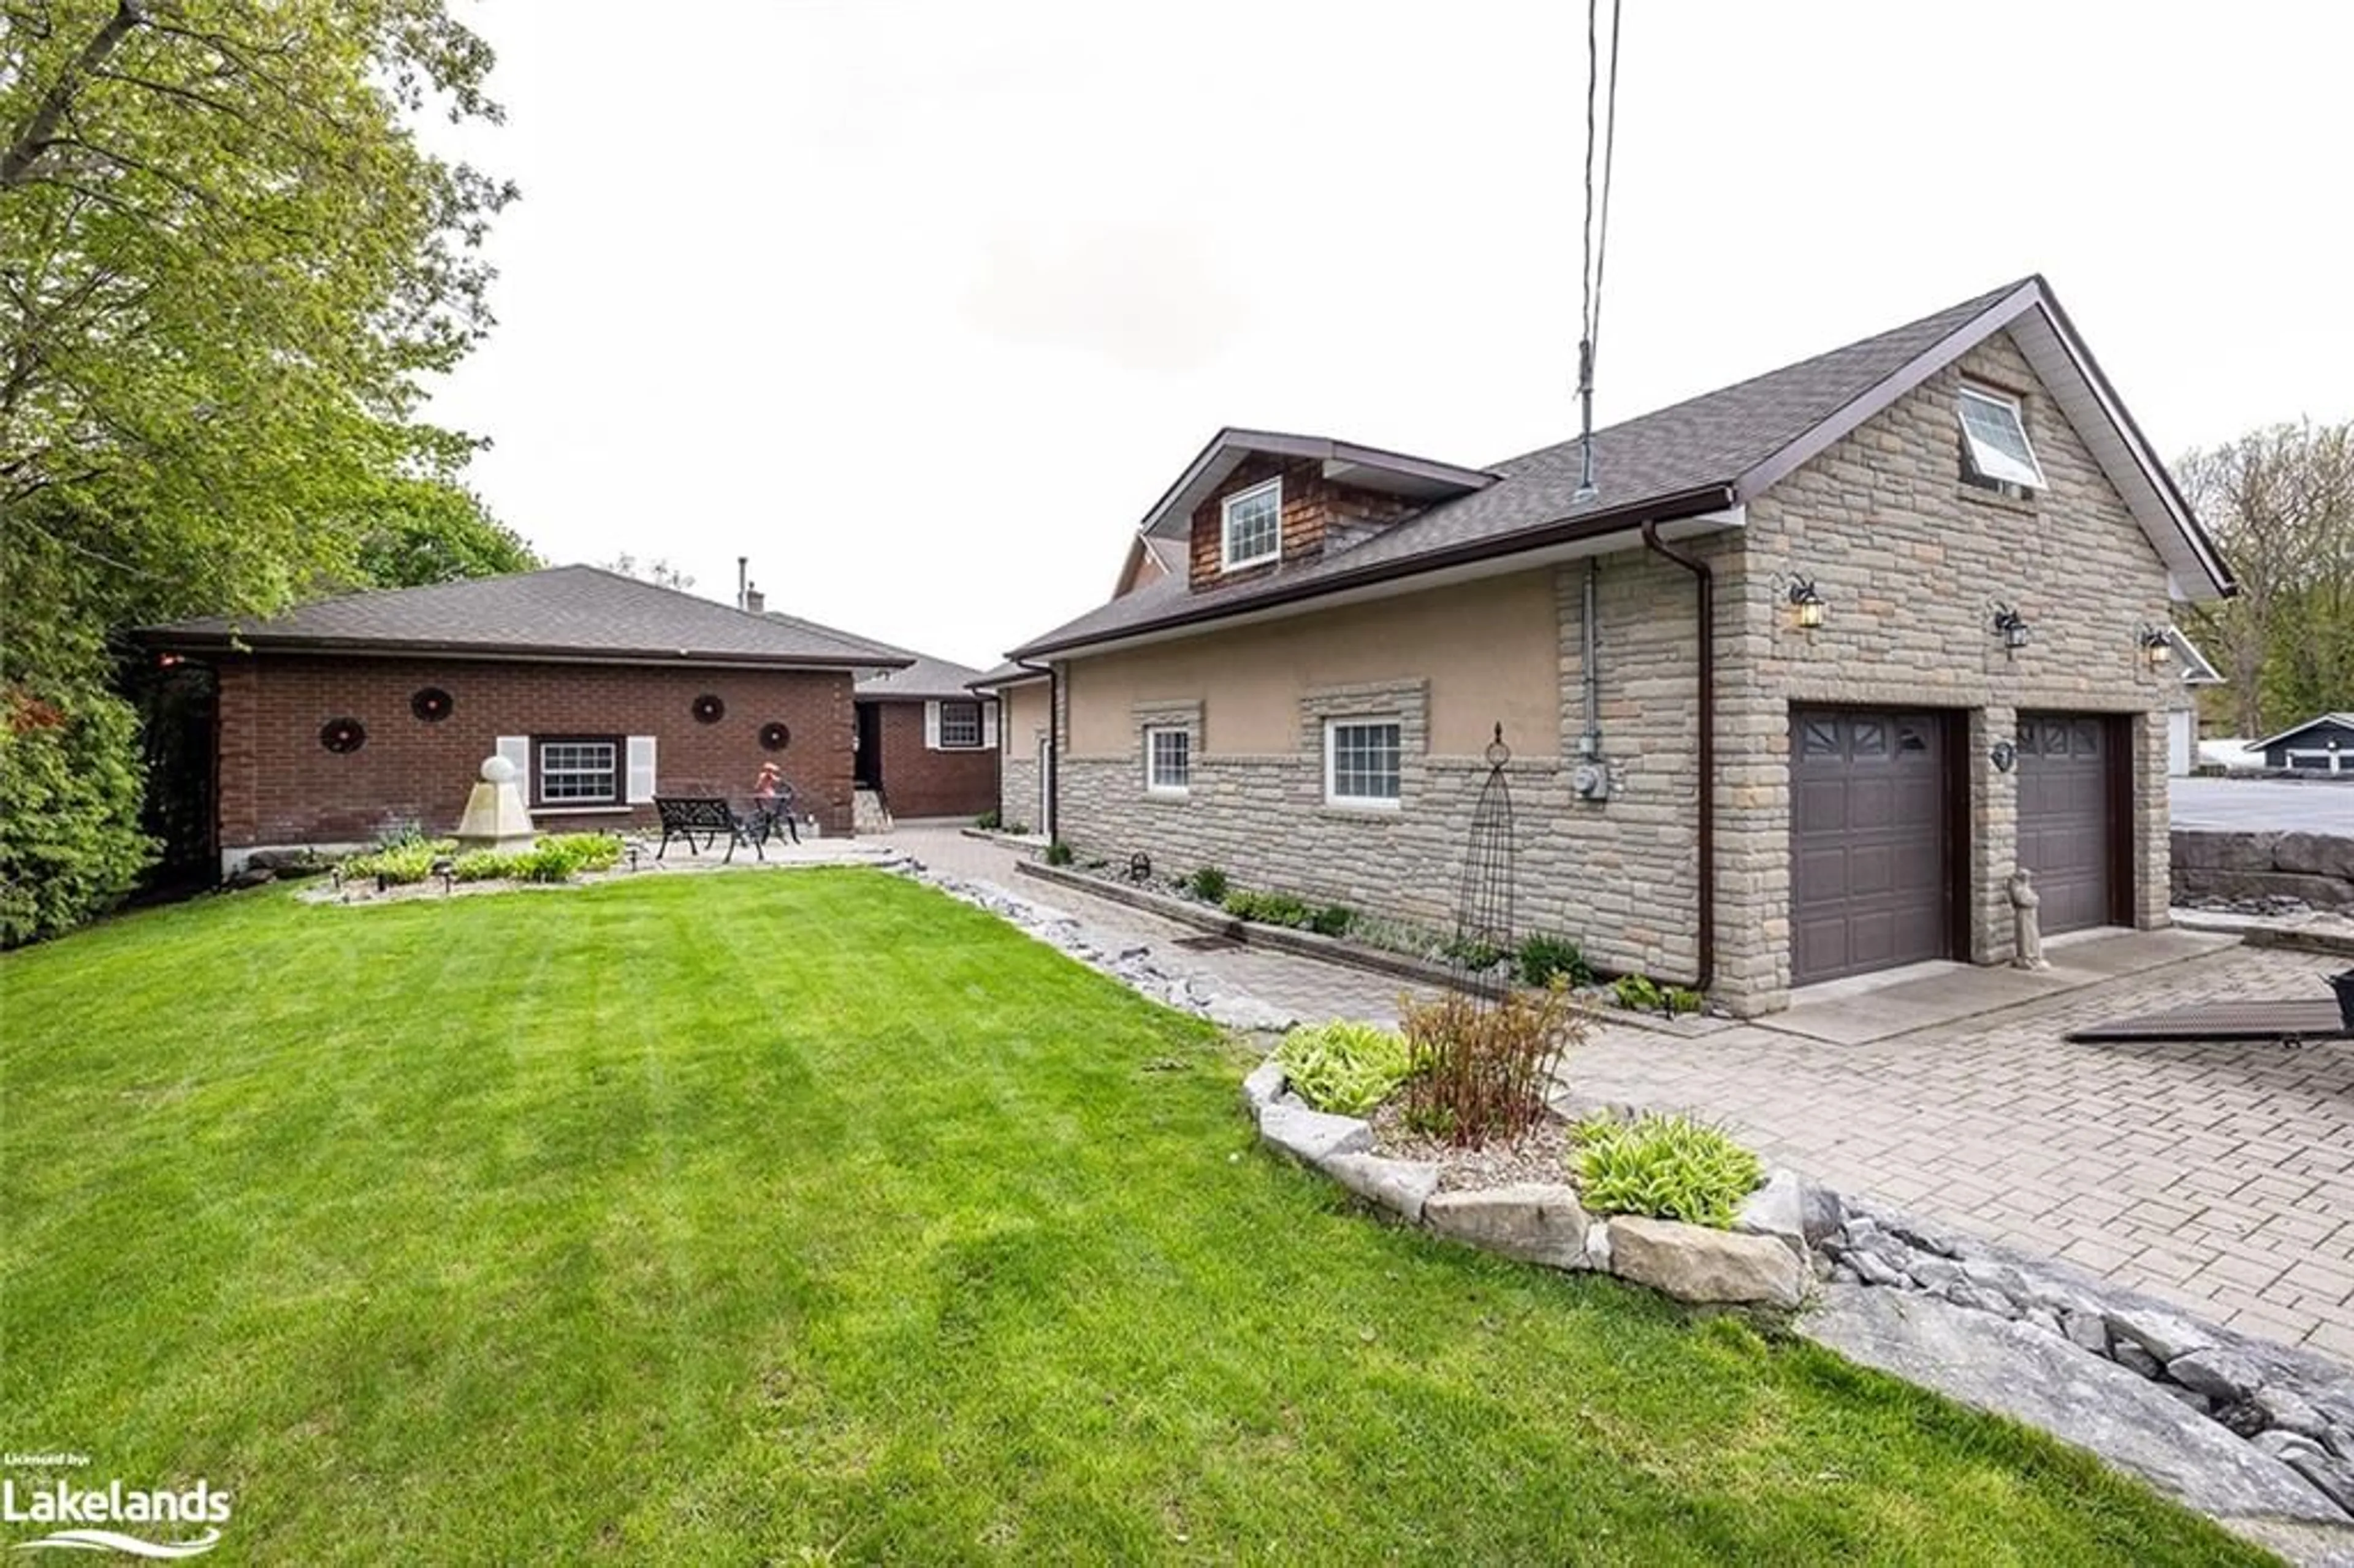 Home with brick exterior material for 75 Riverside Dr, Bobcaygeon Ontario K0M 1A0